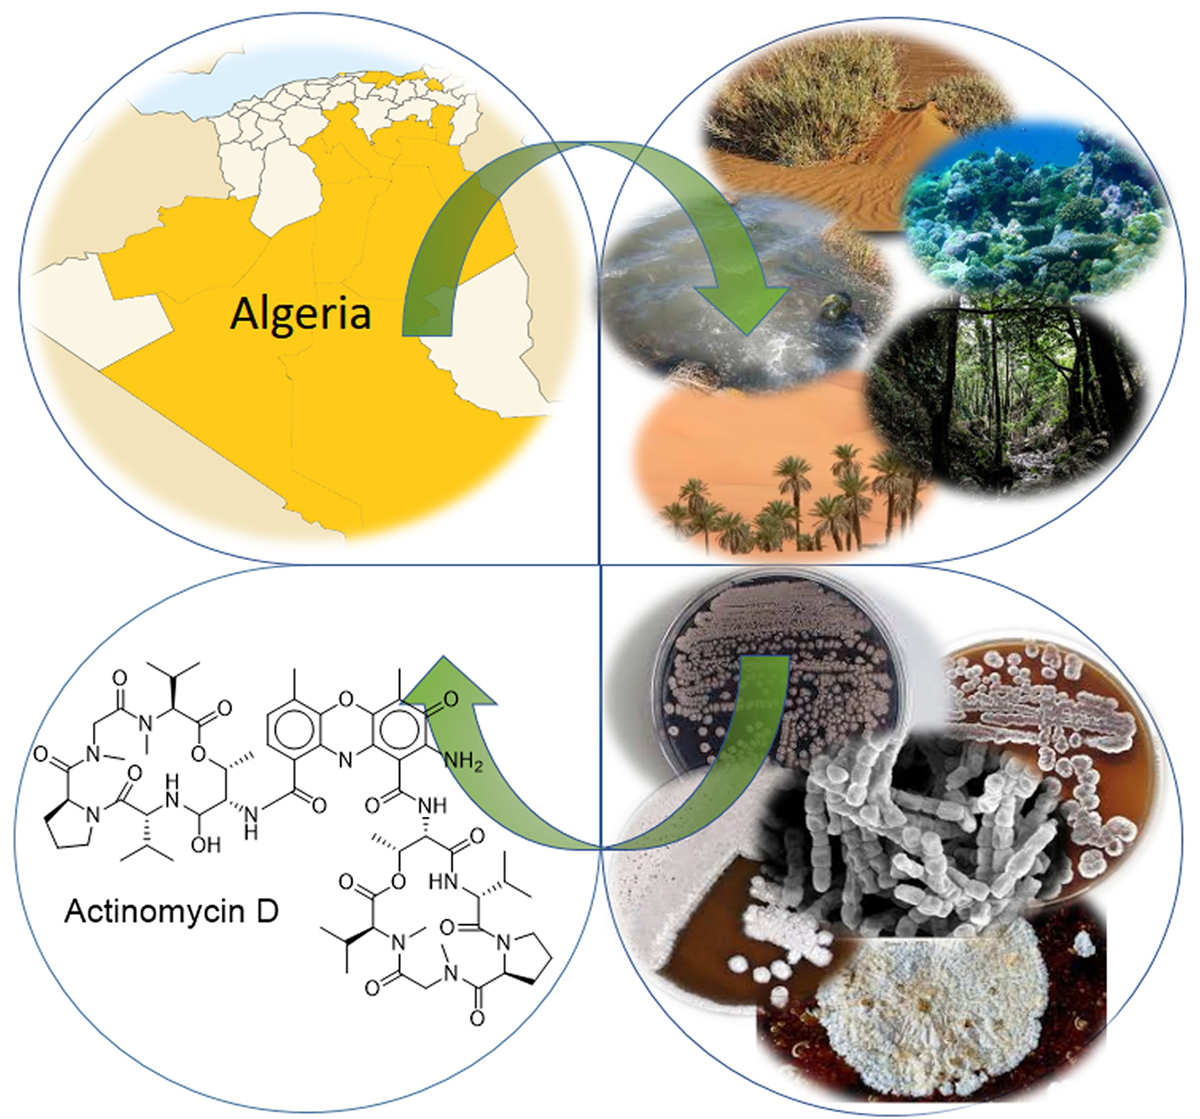 Atlas of Science. Actinobacteria from Algerian ecosystems as a rich source